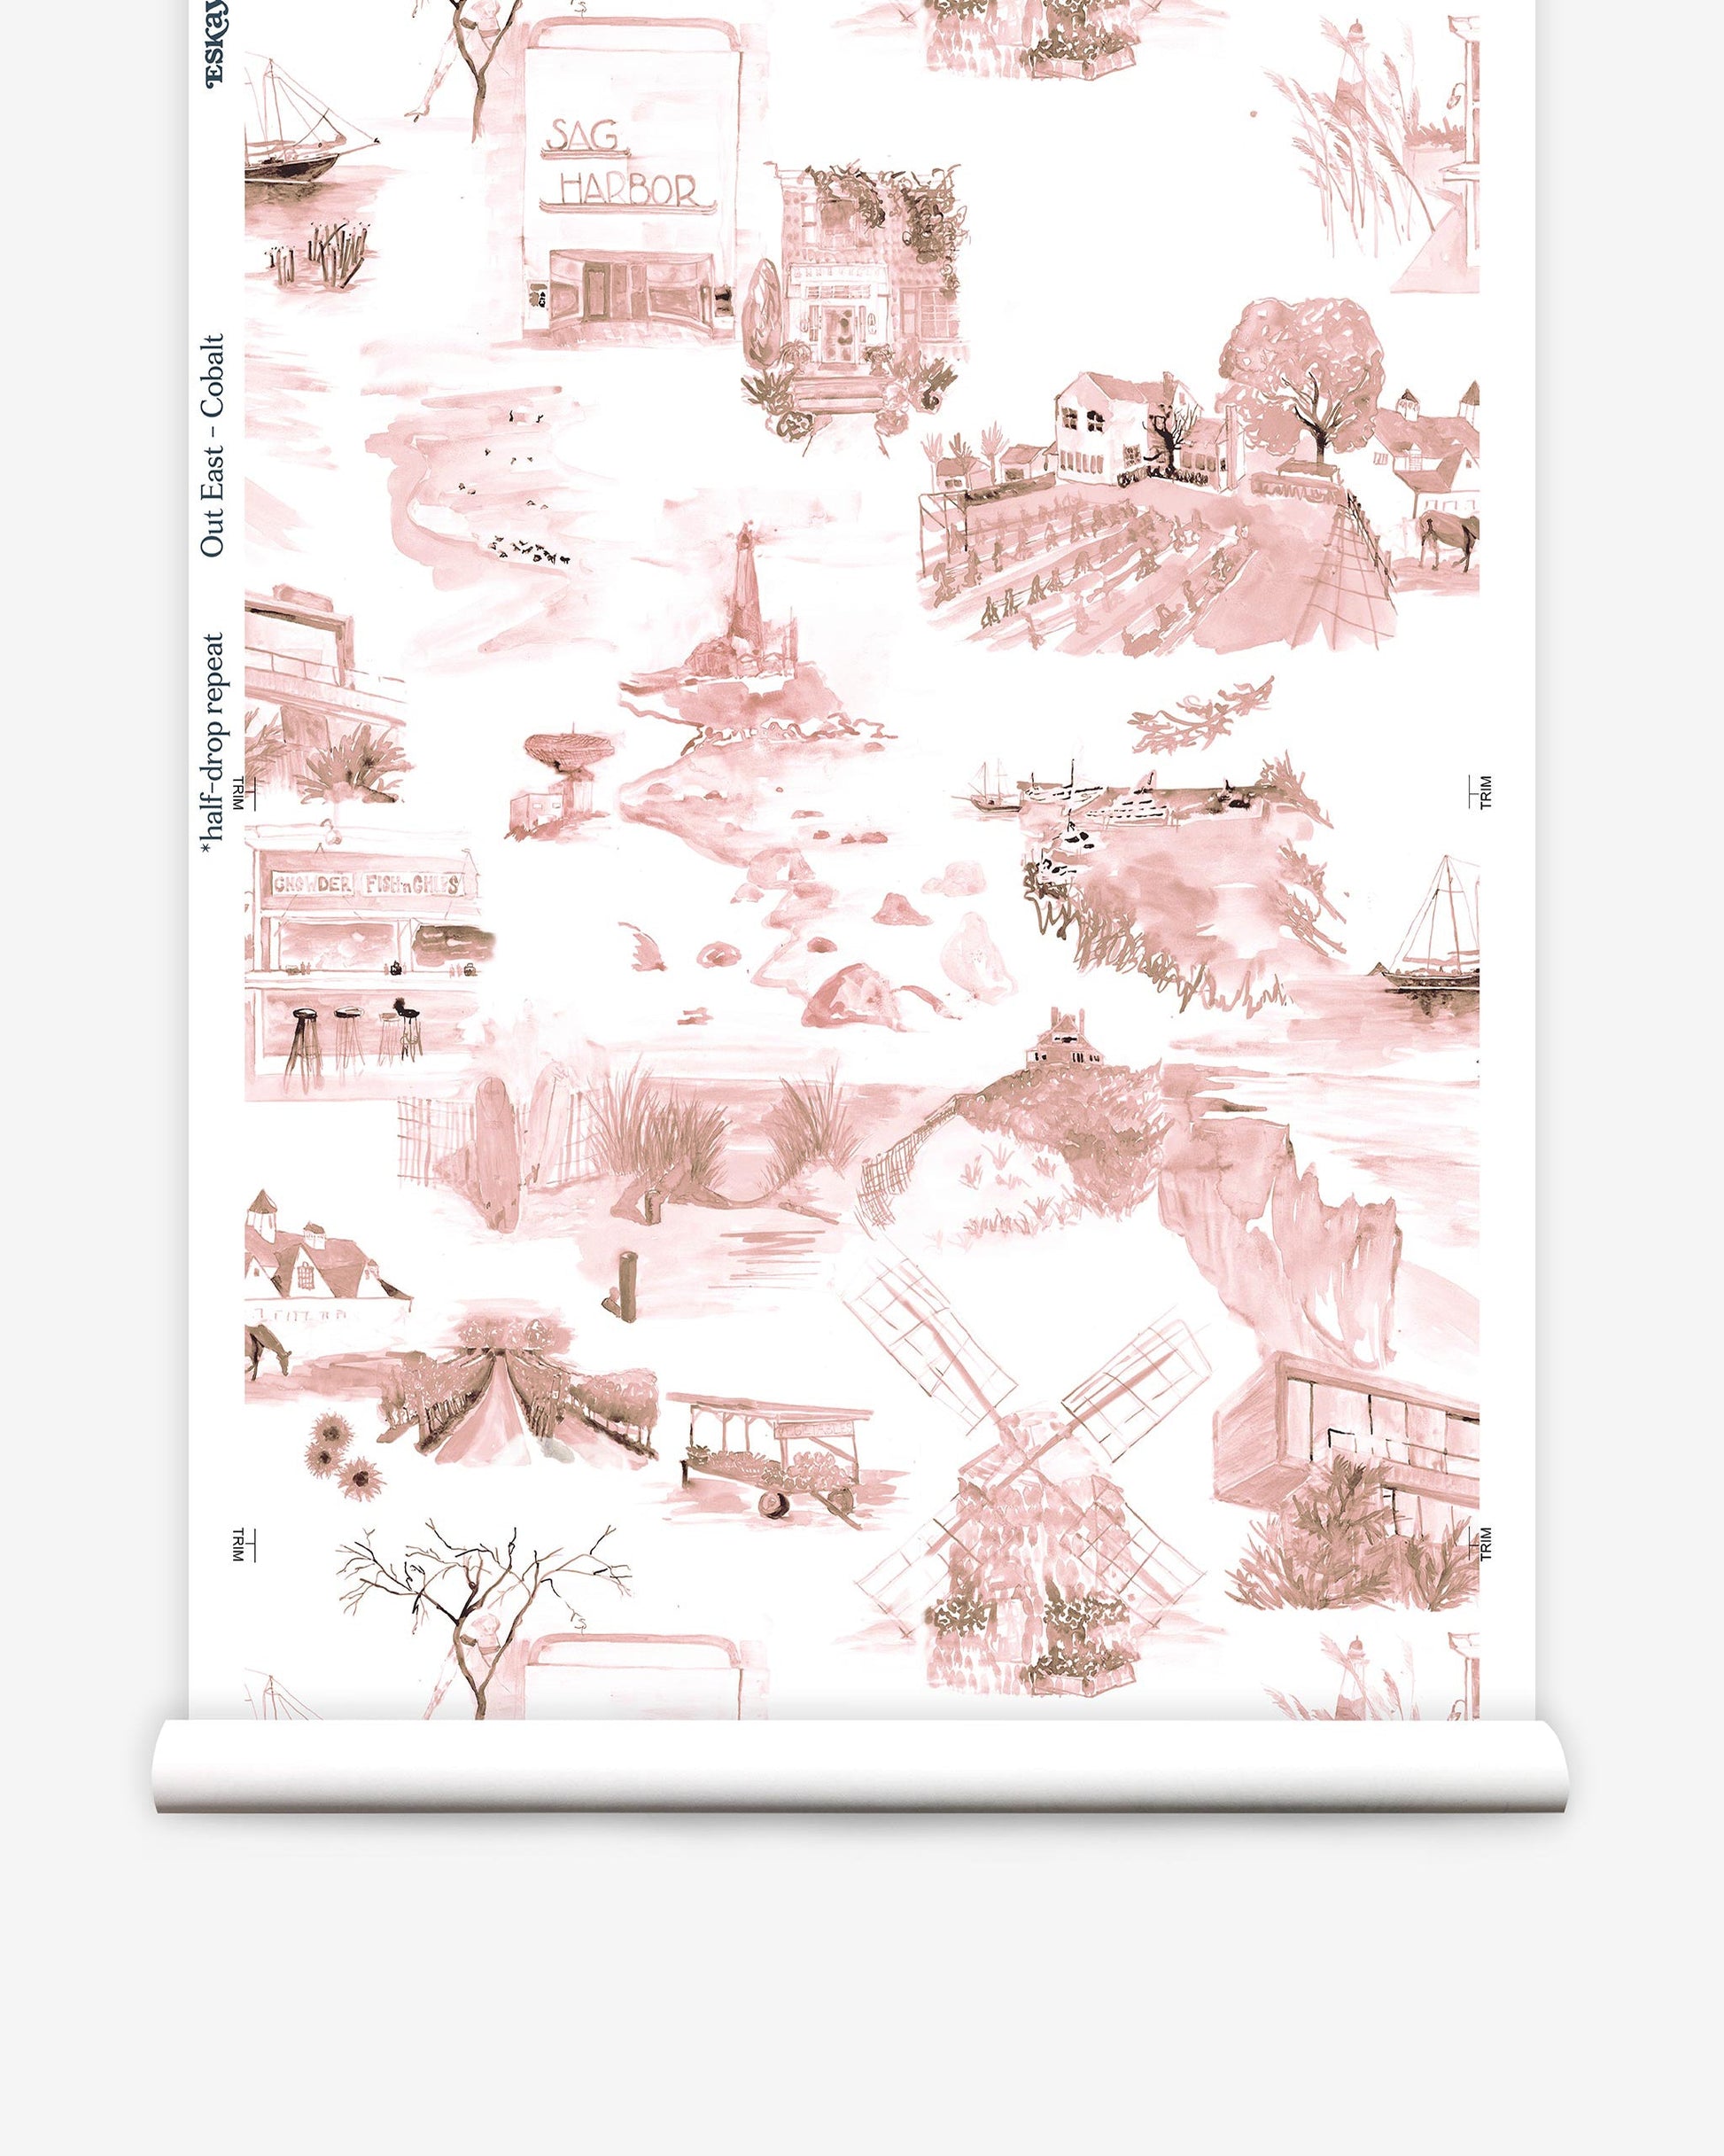 A roll of Out East Wallpaper with a pink and white design